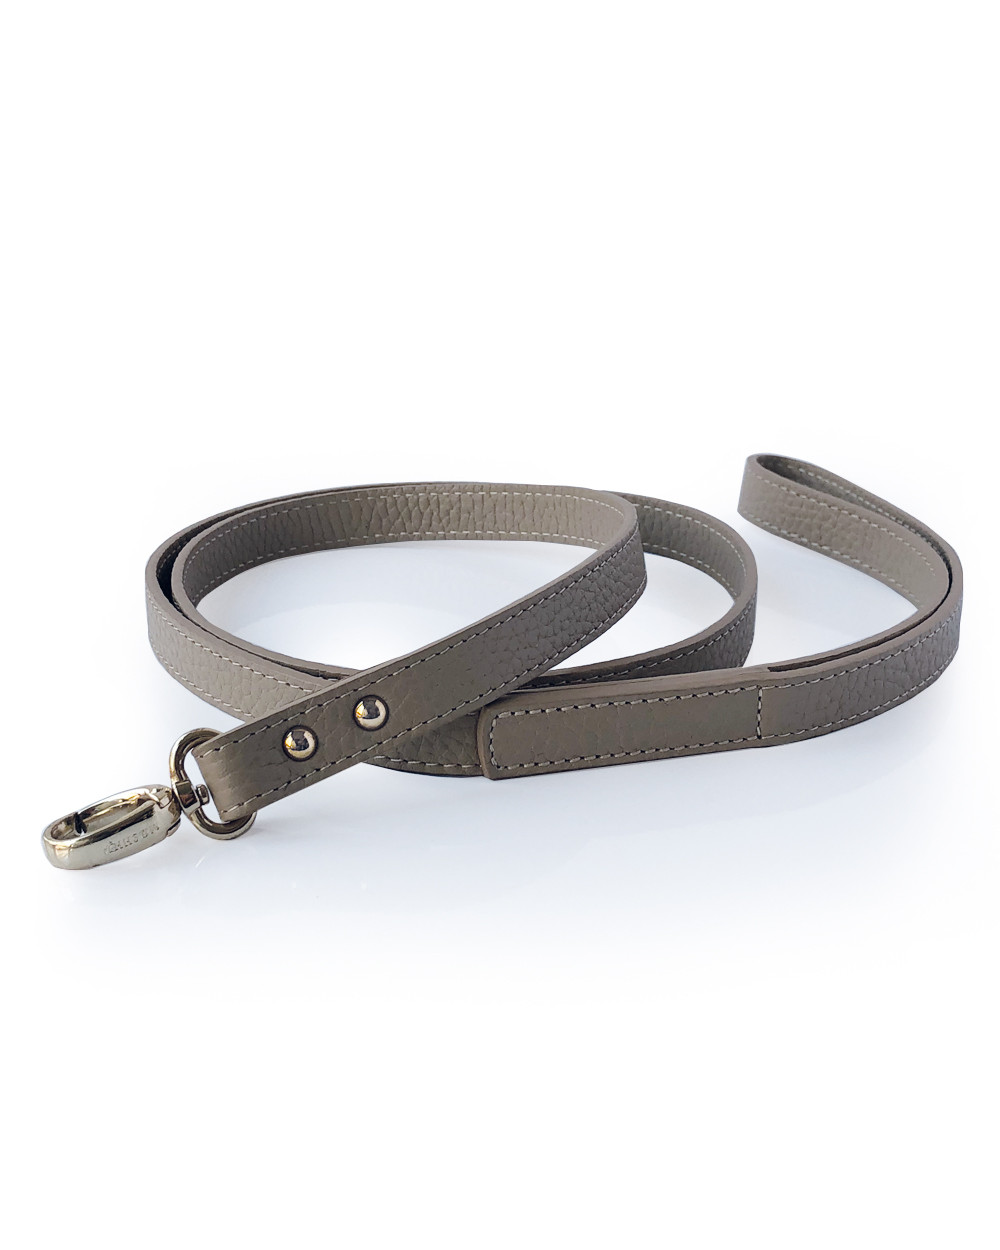 Luxury dog leash - The best for your dog from MOSHIQA